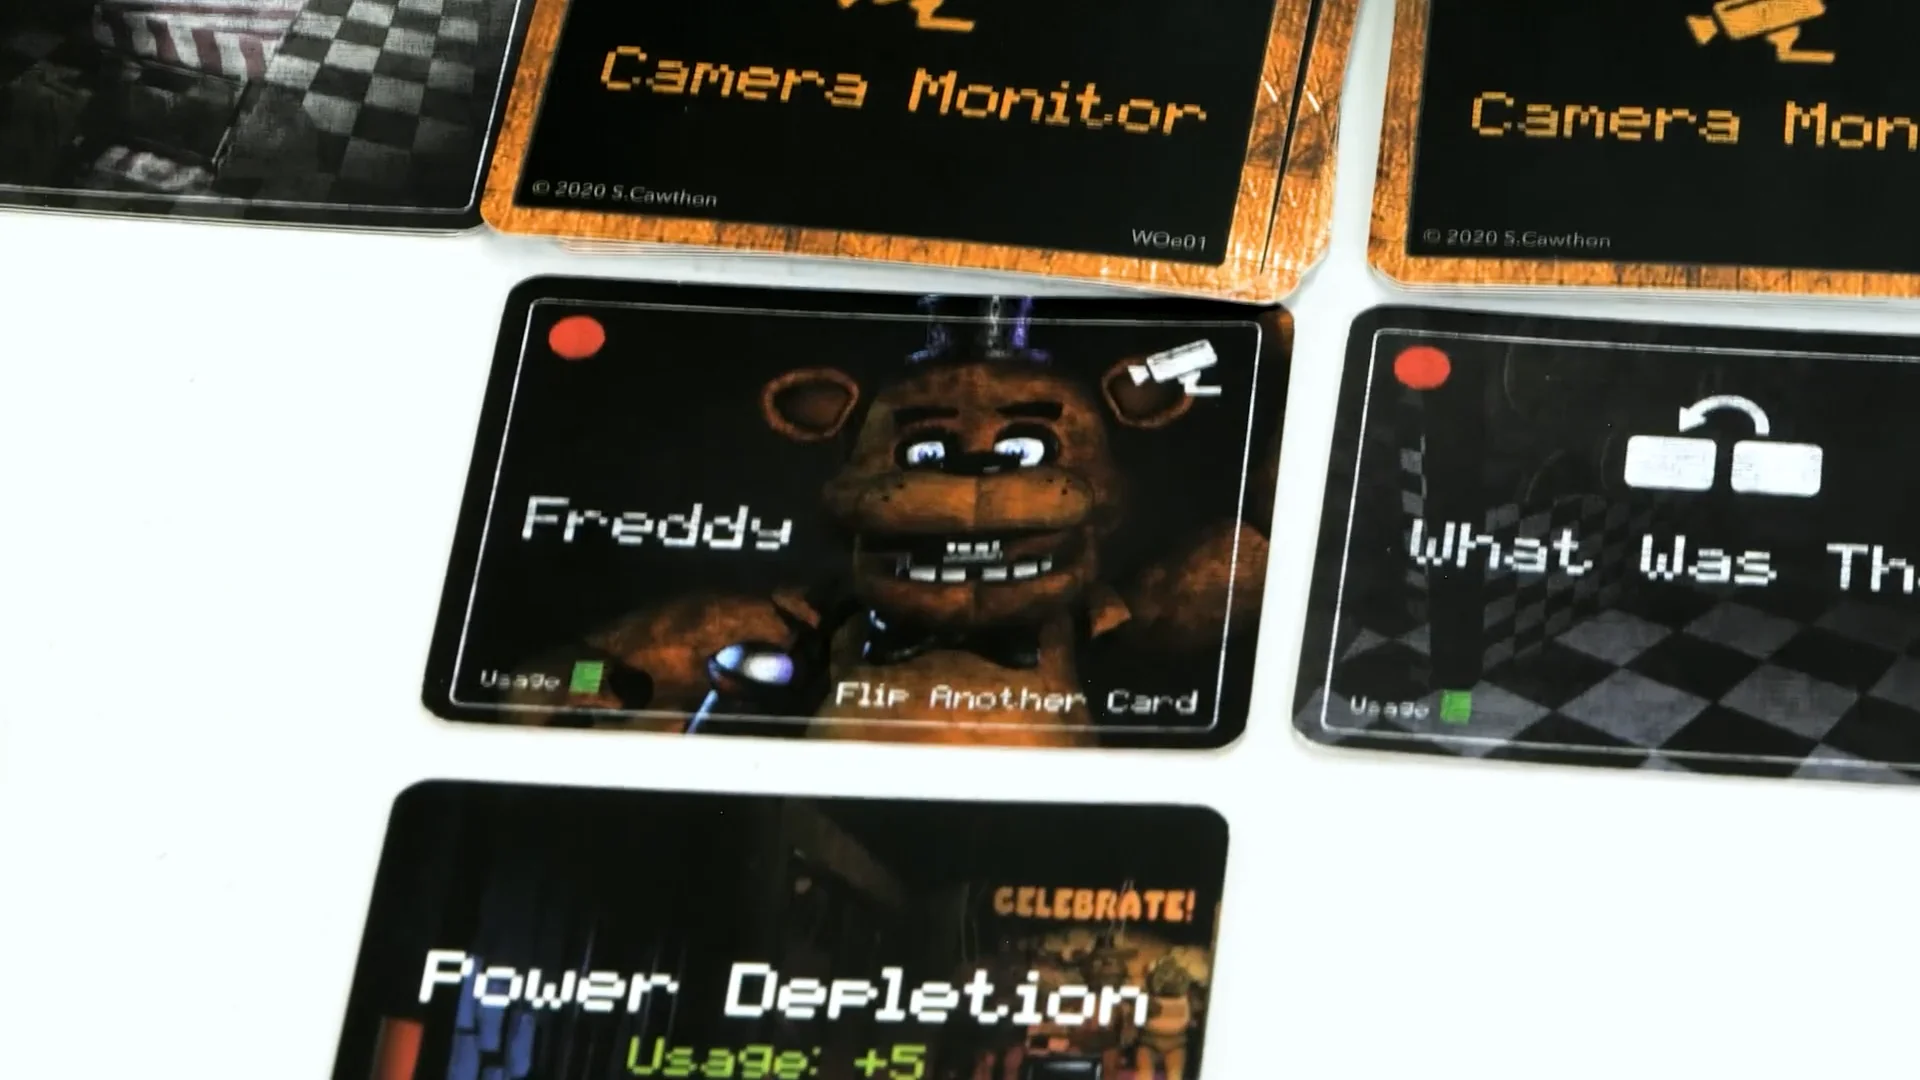 Funko Five Nights at Freddy's - Survive 'Til 6AM Game